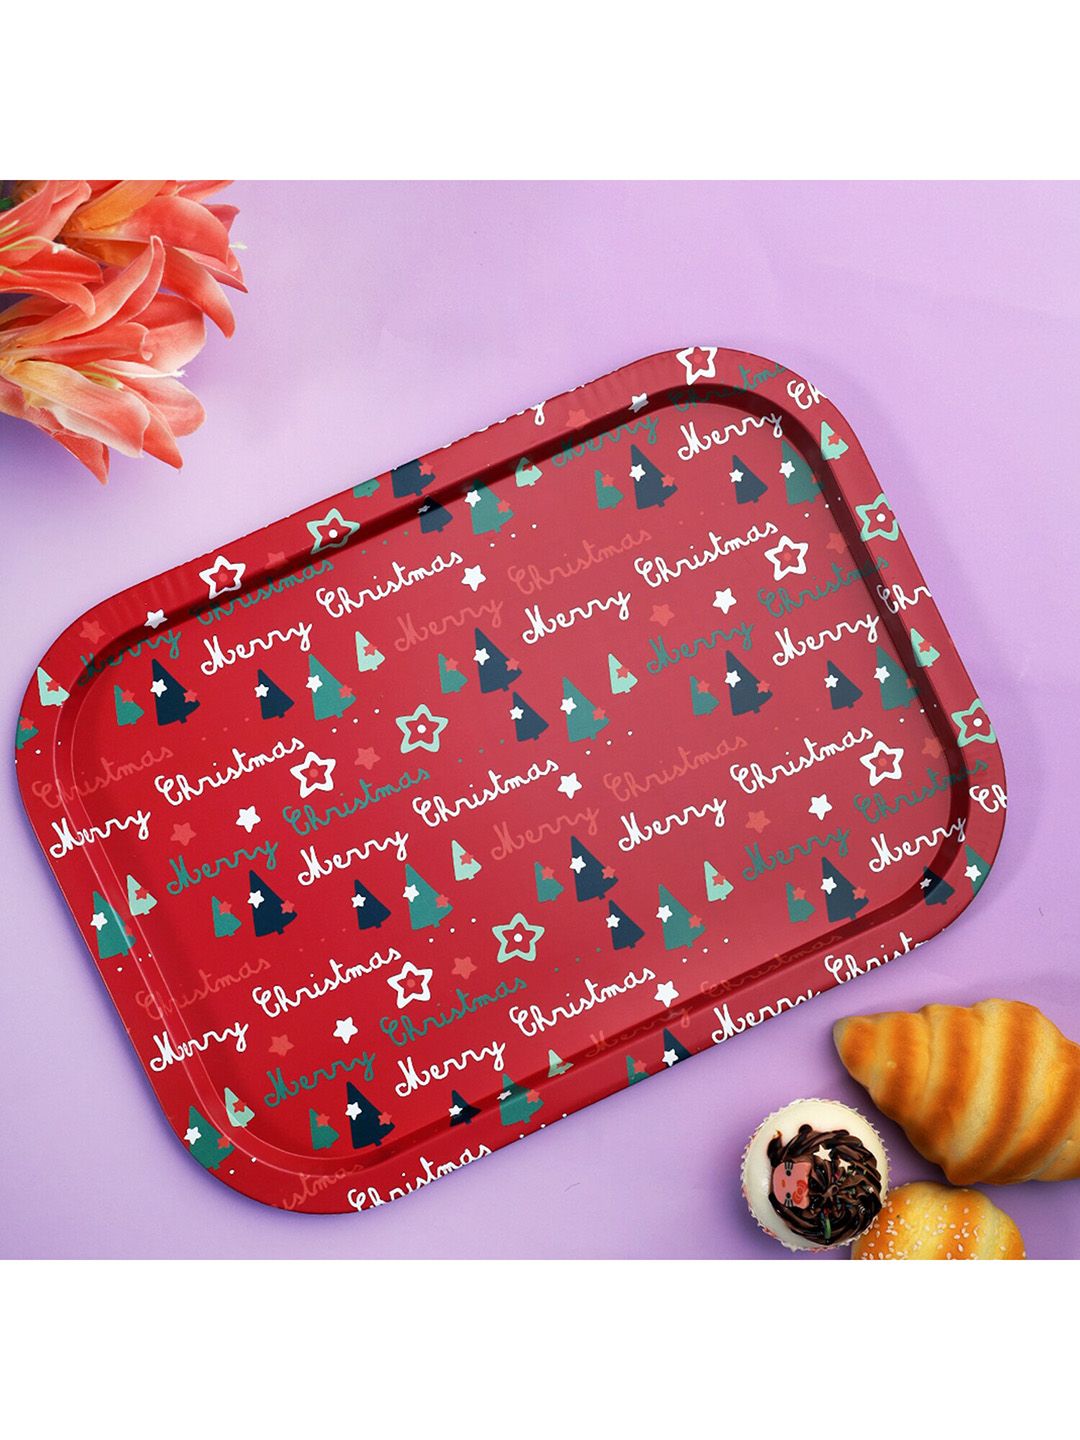 A Vintage Affair- Home Decor Red & White Printed Merry Christmas Gift Tray Price in India